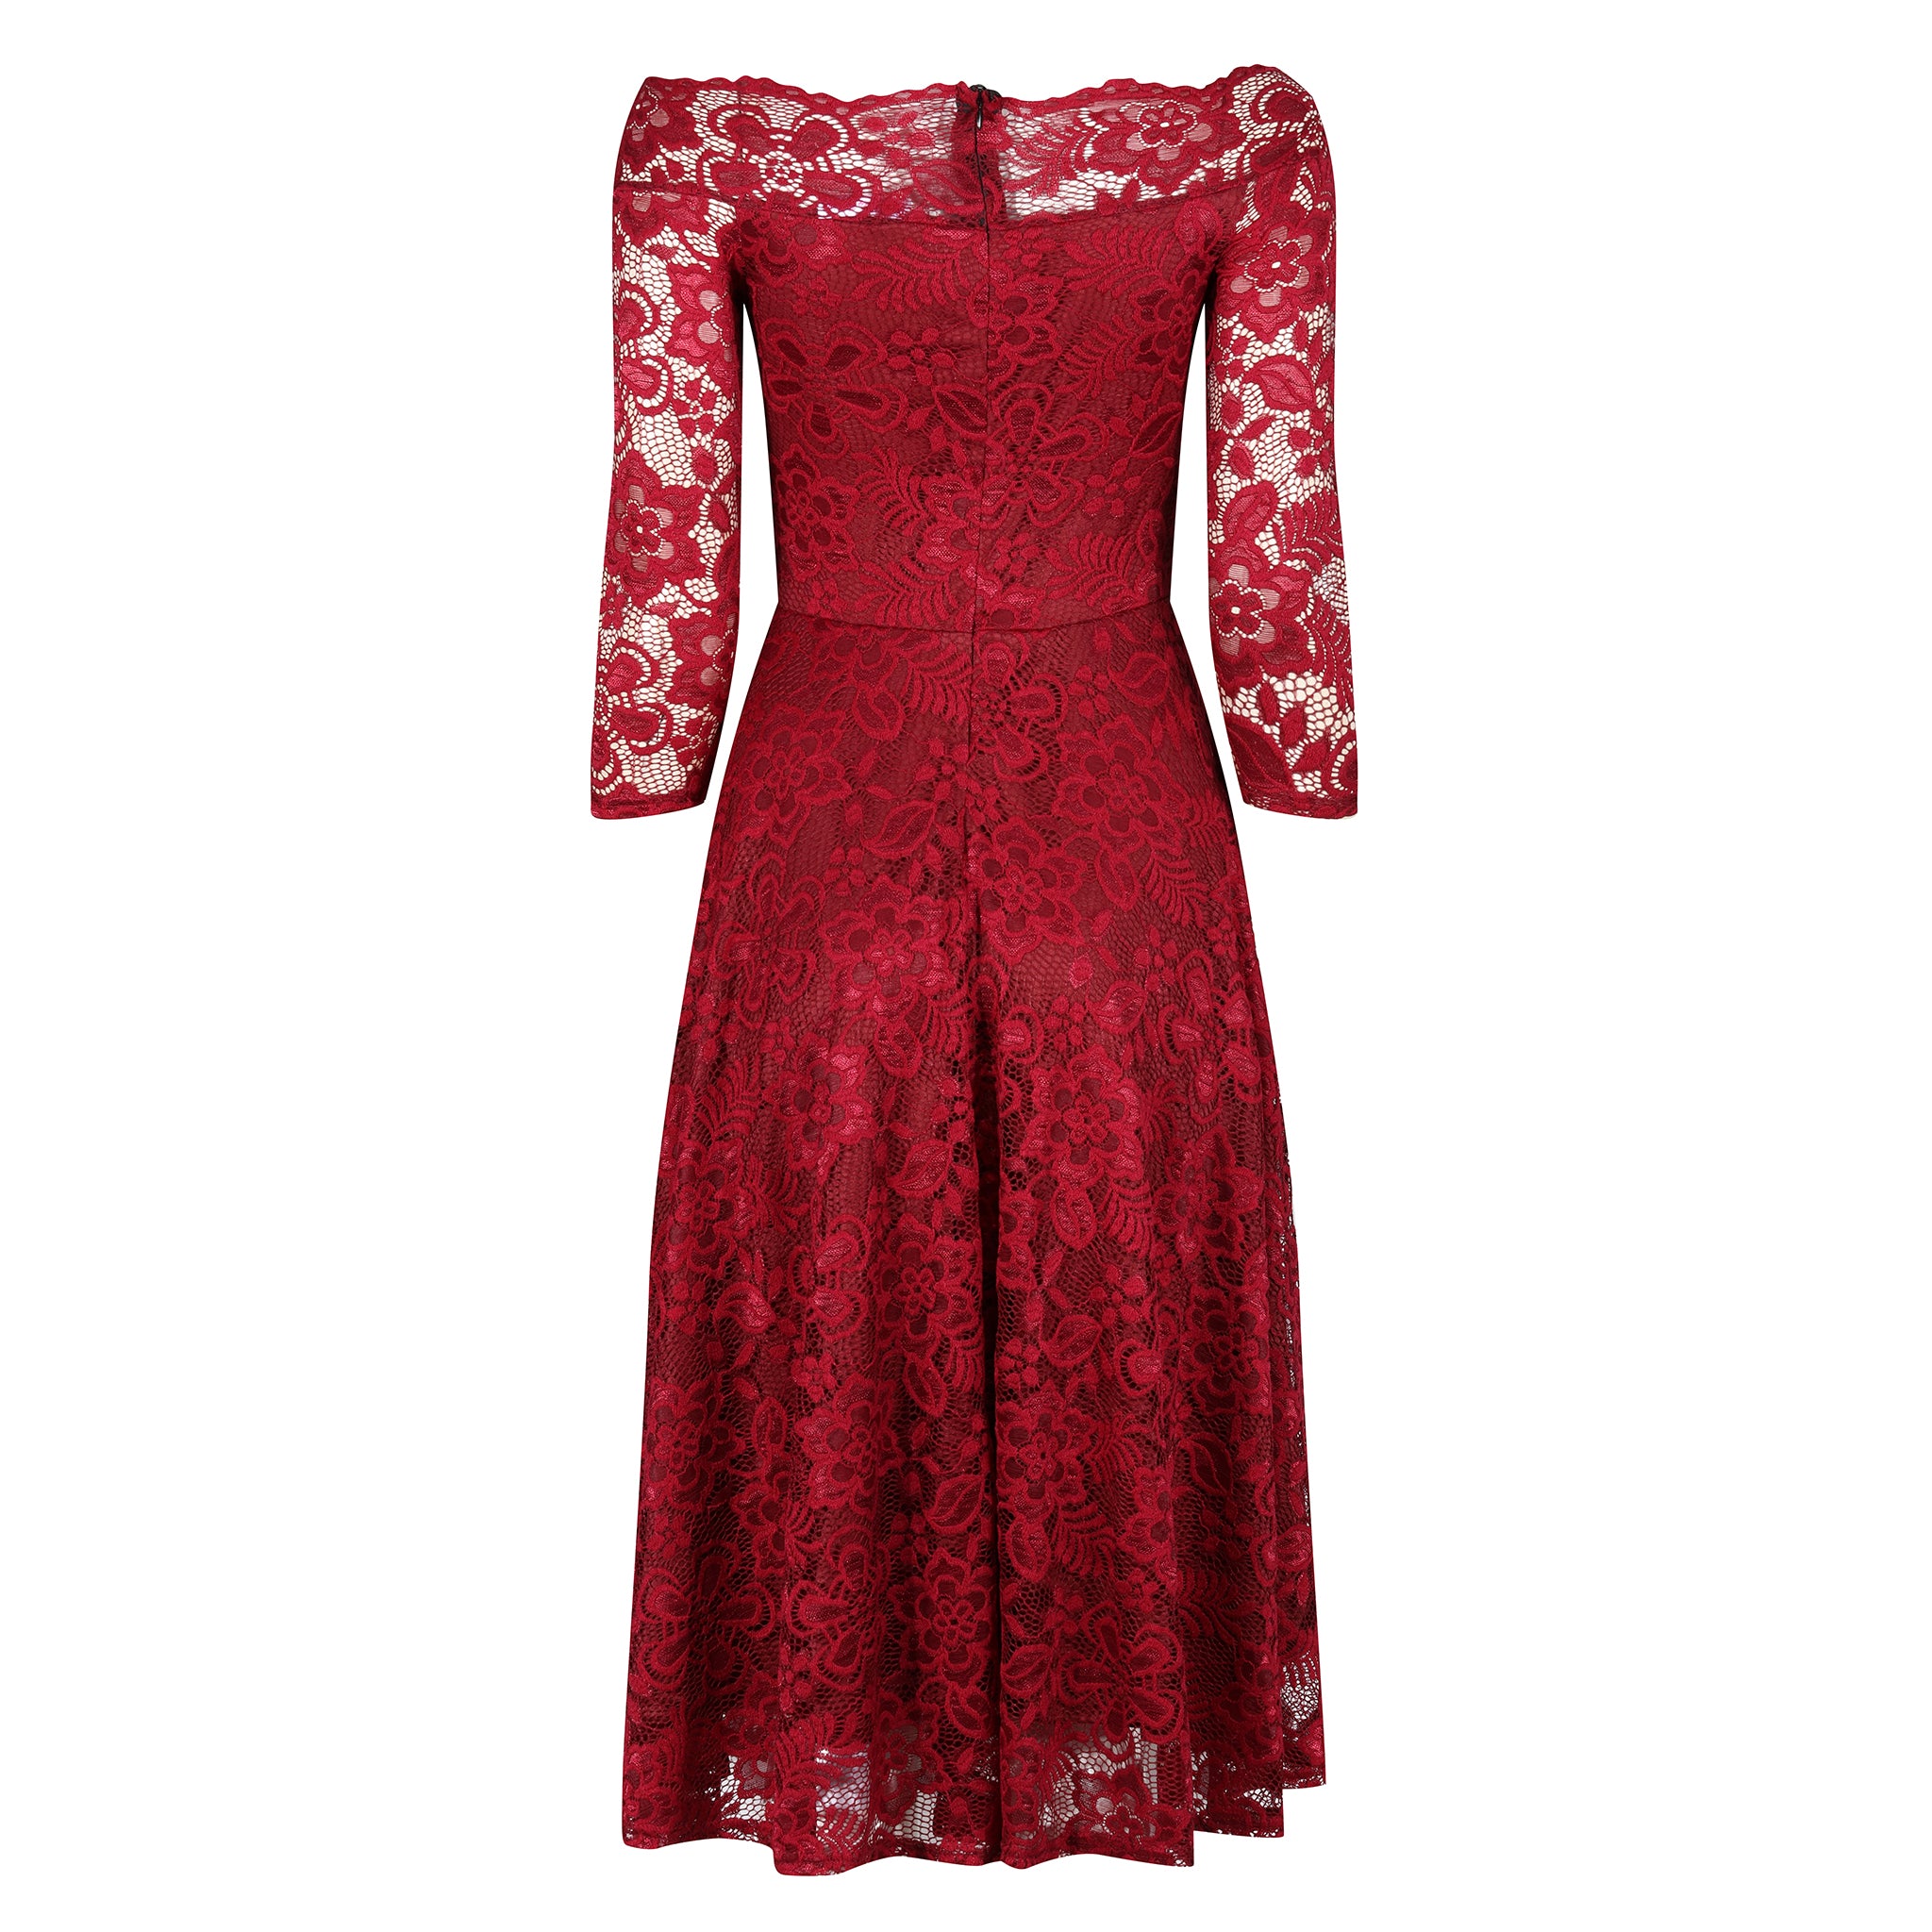 Wine Red Lace Vintage Style Swing Dress With 3/4 Sleeves & Boat Neck